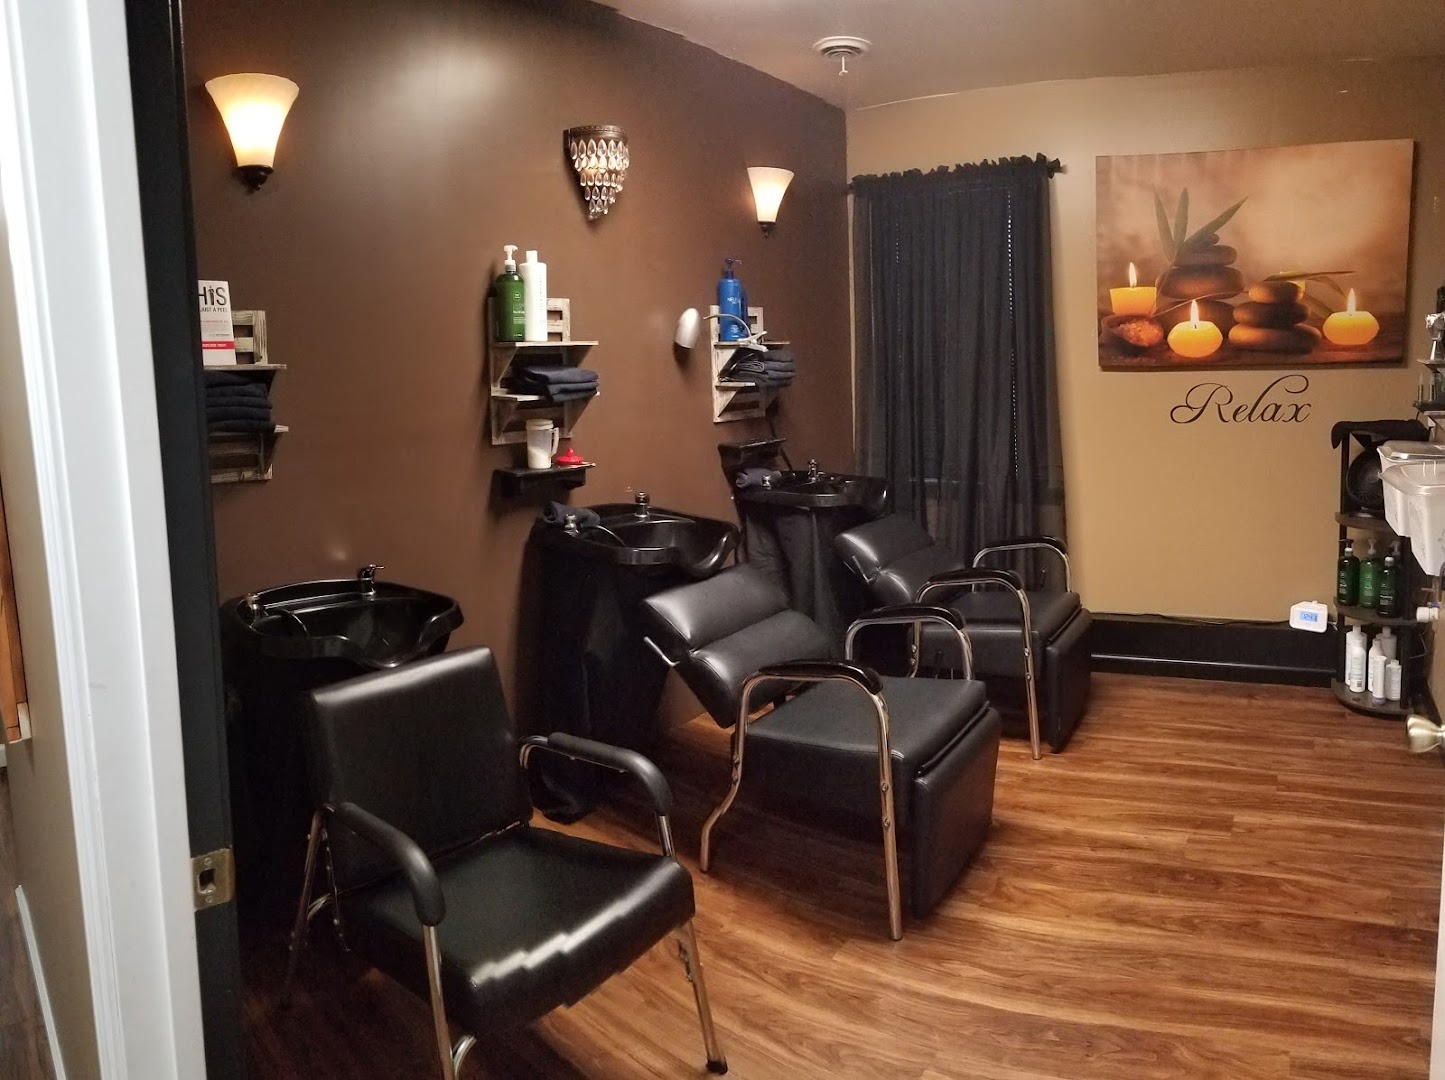 Stacey's Ultimate Image Salon & Spa